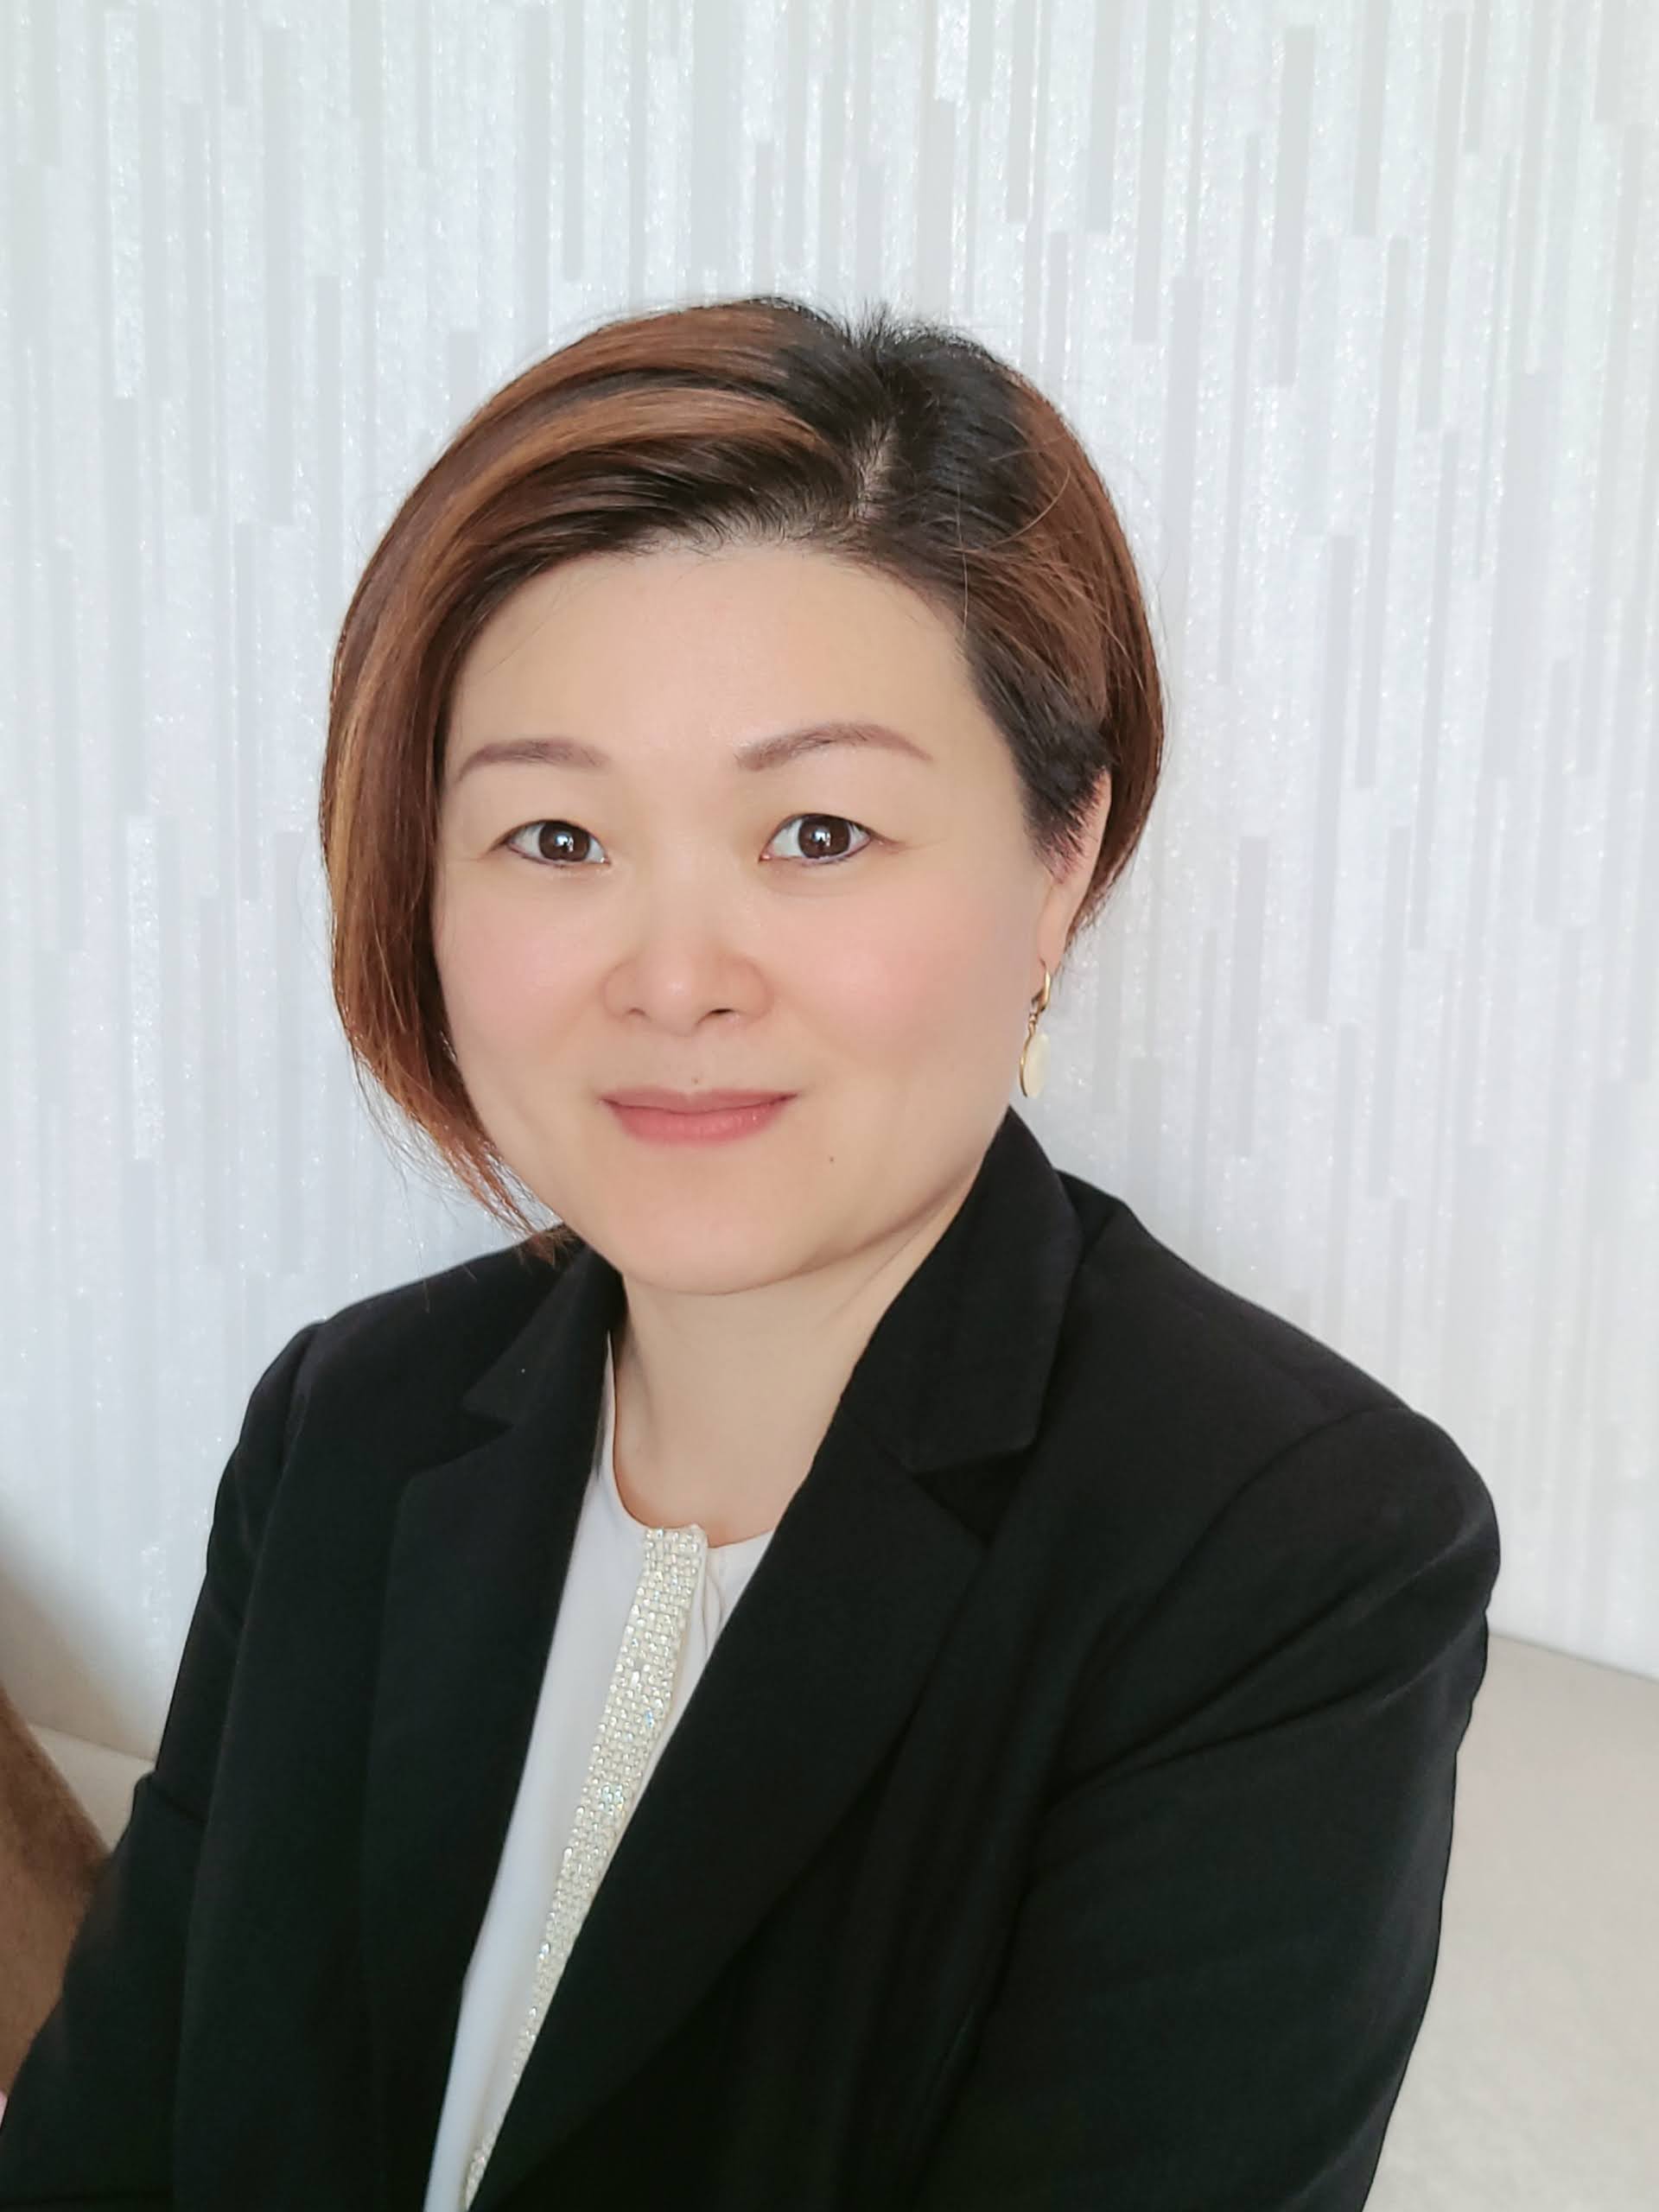 Jacely Voon, <span>Chief People Officer at Fujifilm Business Innovation, Singapore</span>